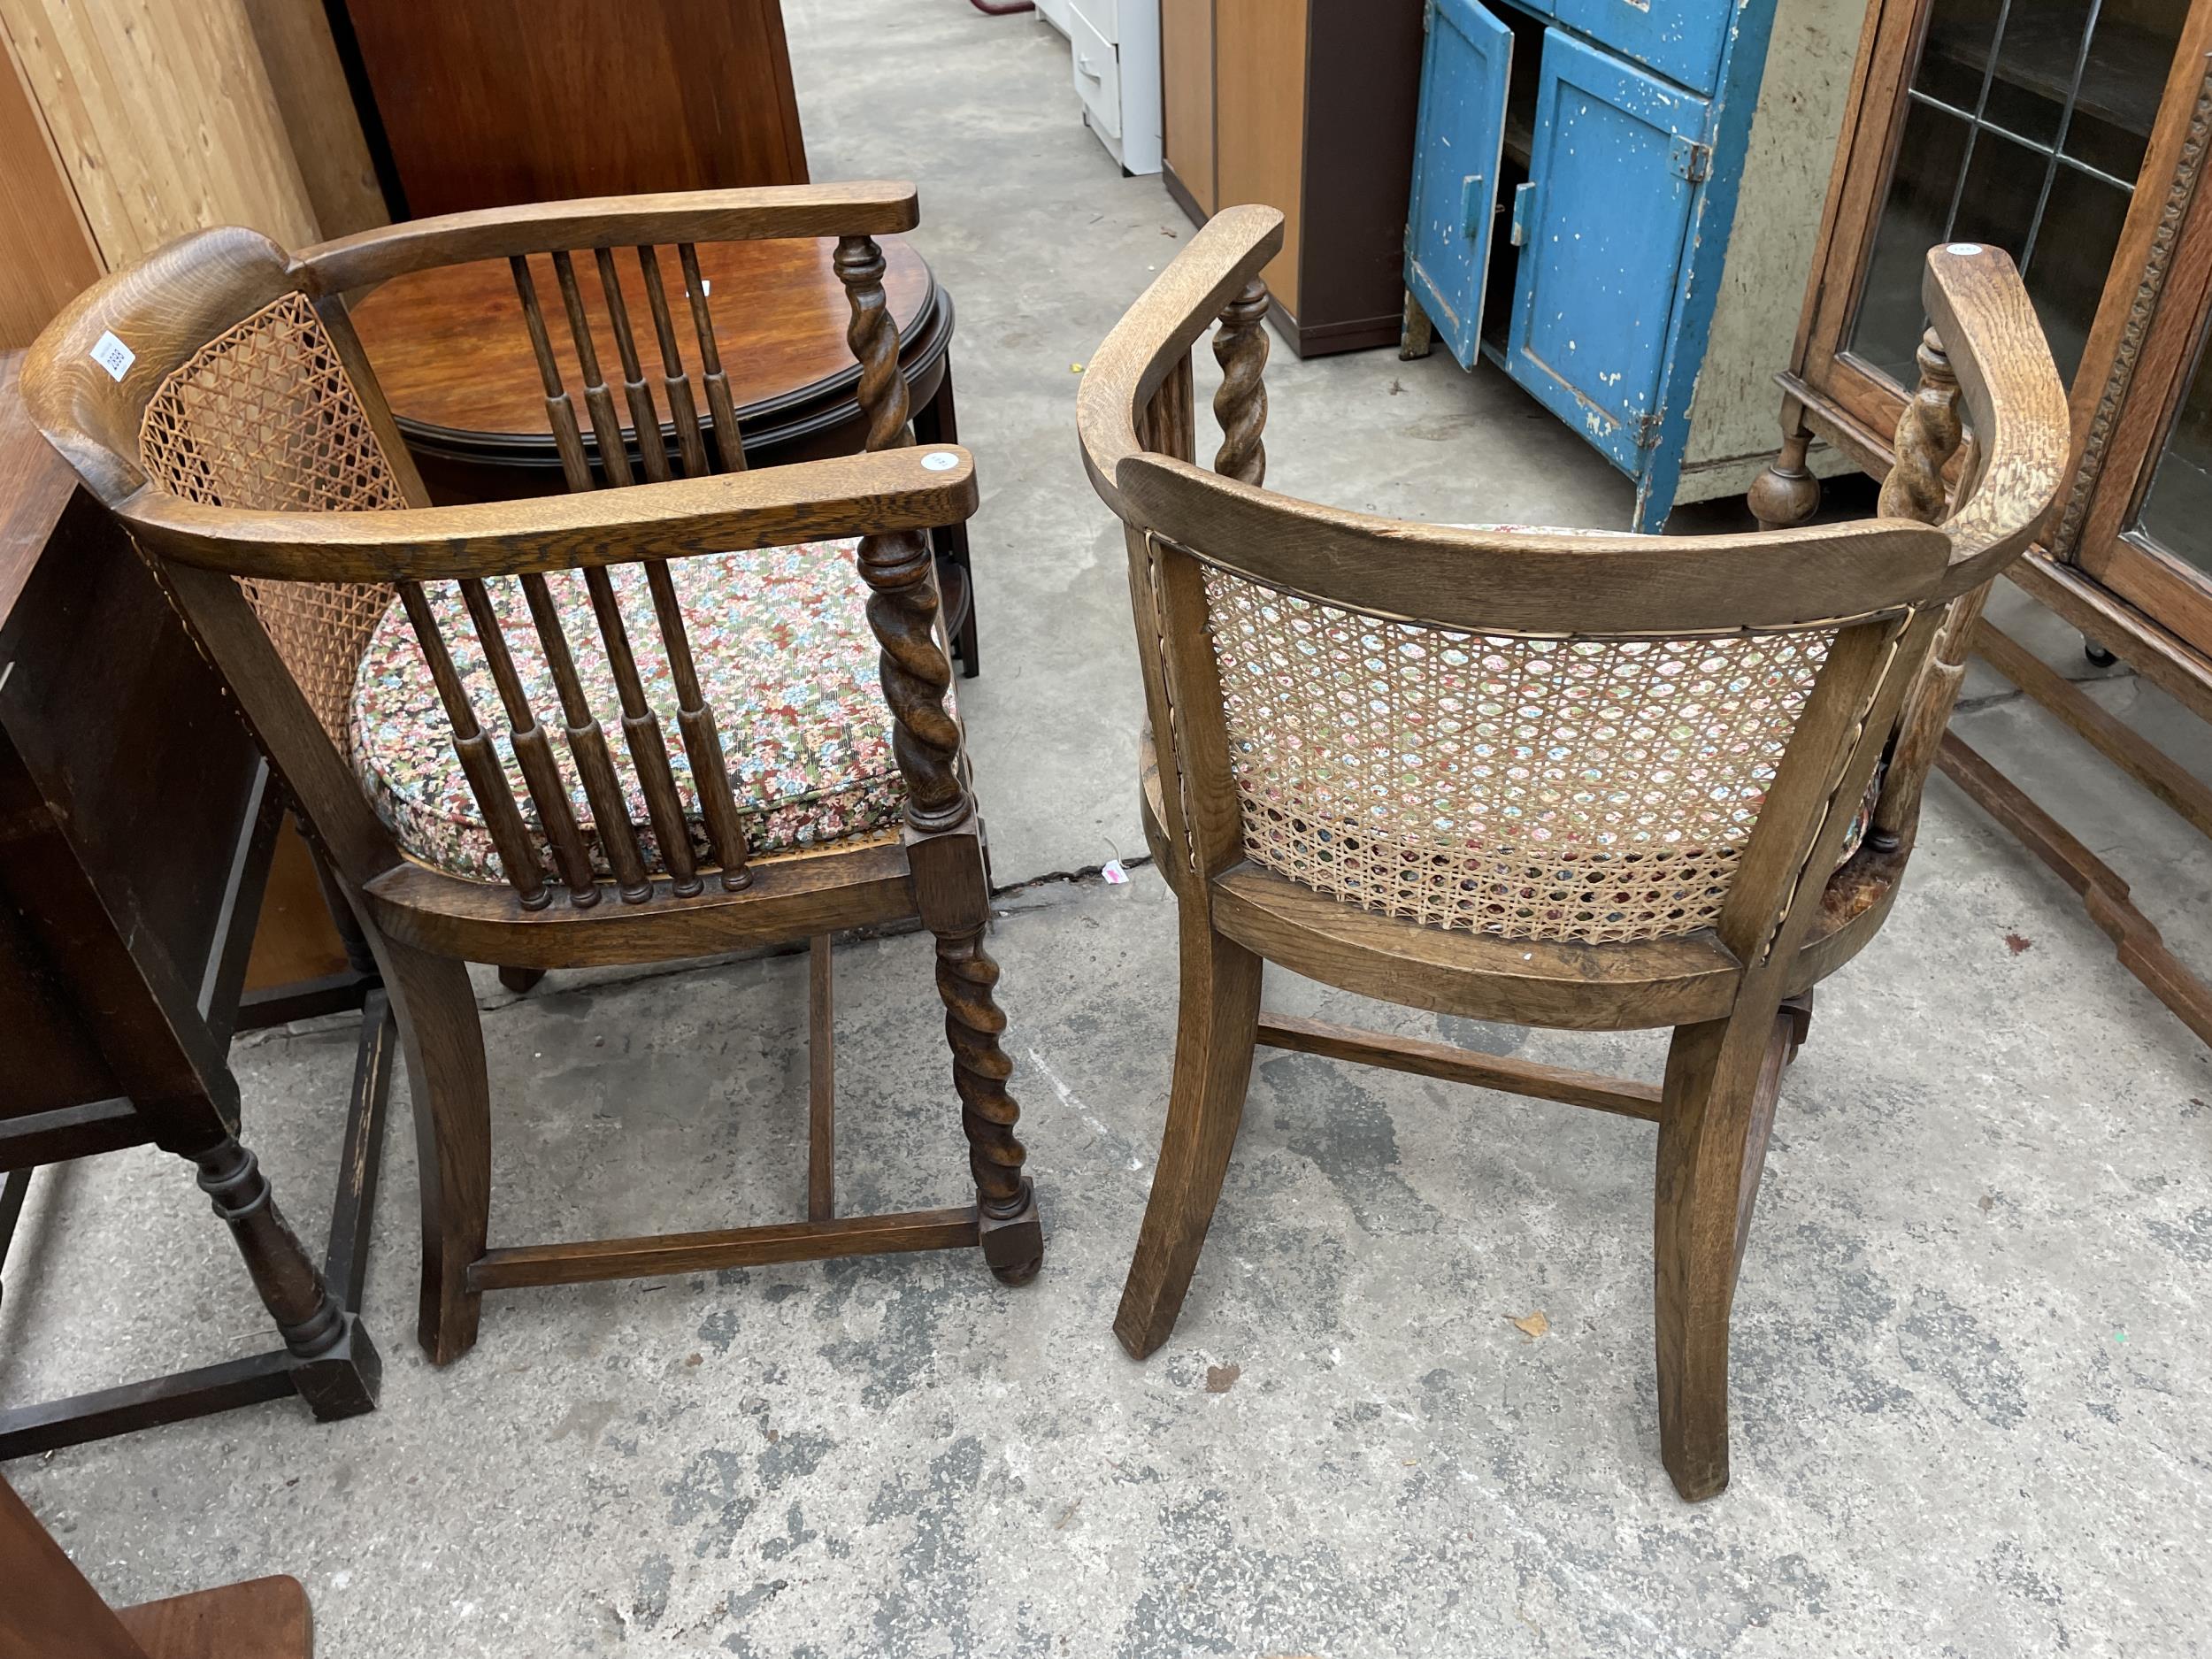 A PAIR OF EARLY 20TH CENTURY OAK TUB CHAIRS WITH CANE SEATS AND BACKS ON BARLEY TWIST LEGS AND - Image 4 of 4